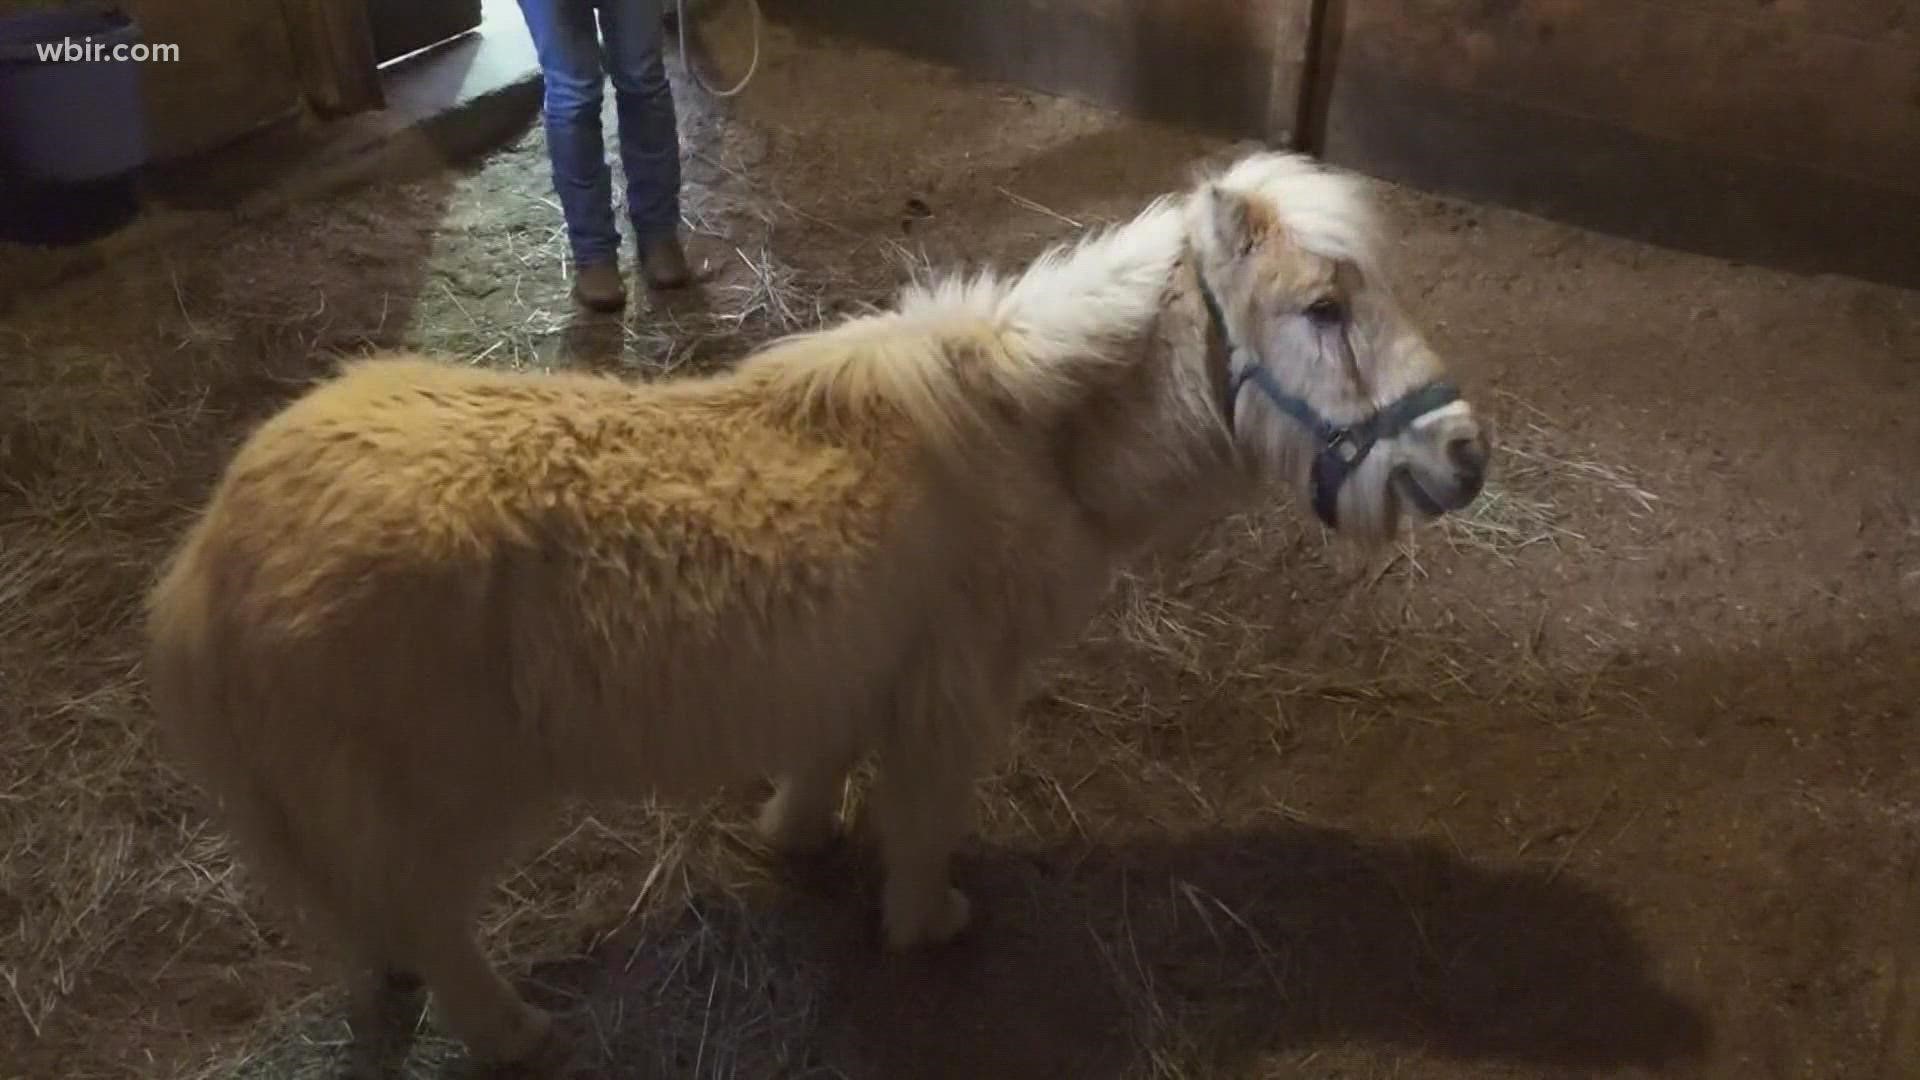 The staff found the miniature horse roaming through a cow field in Claiborne County.